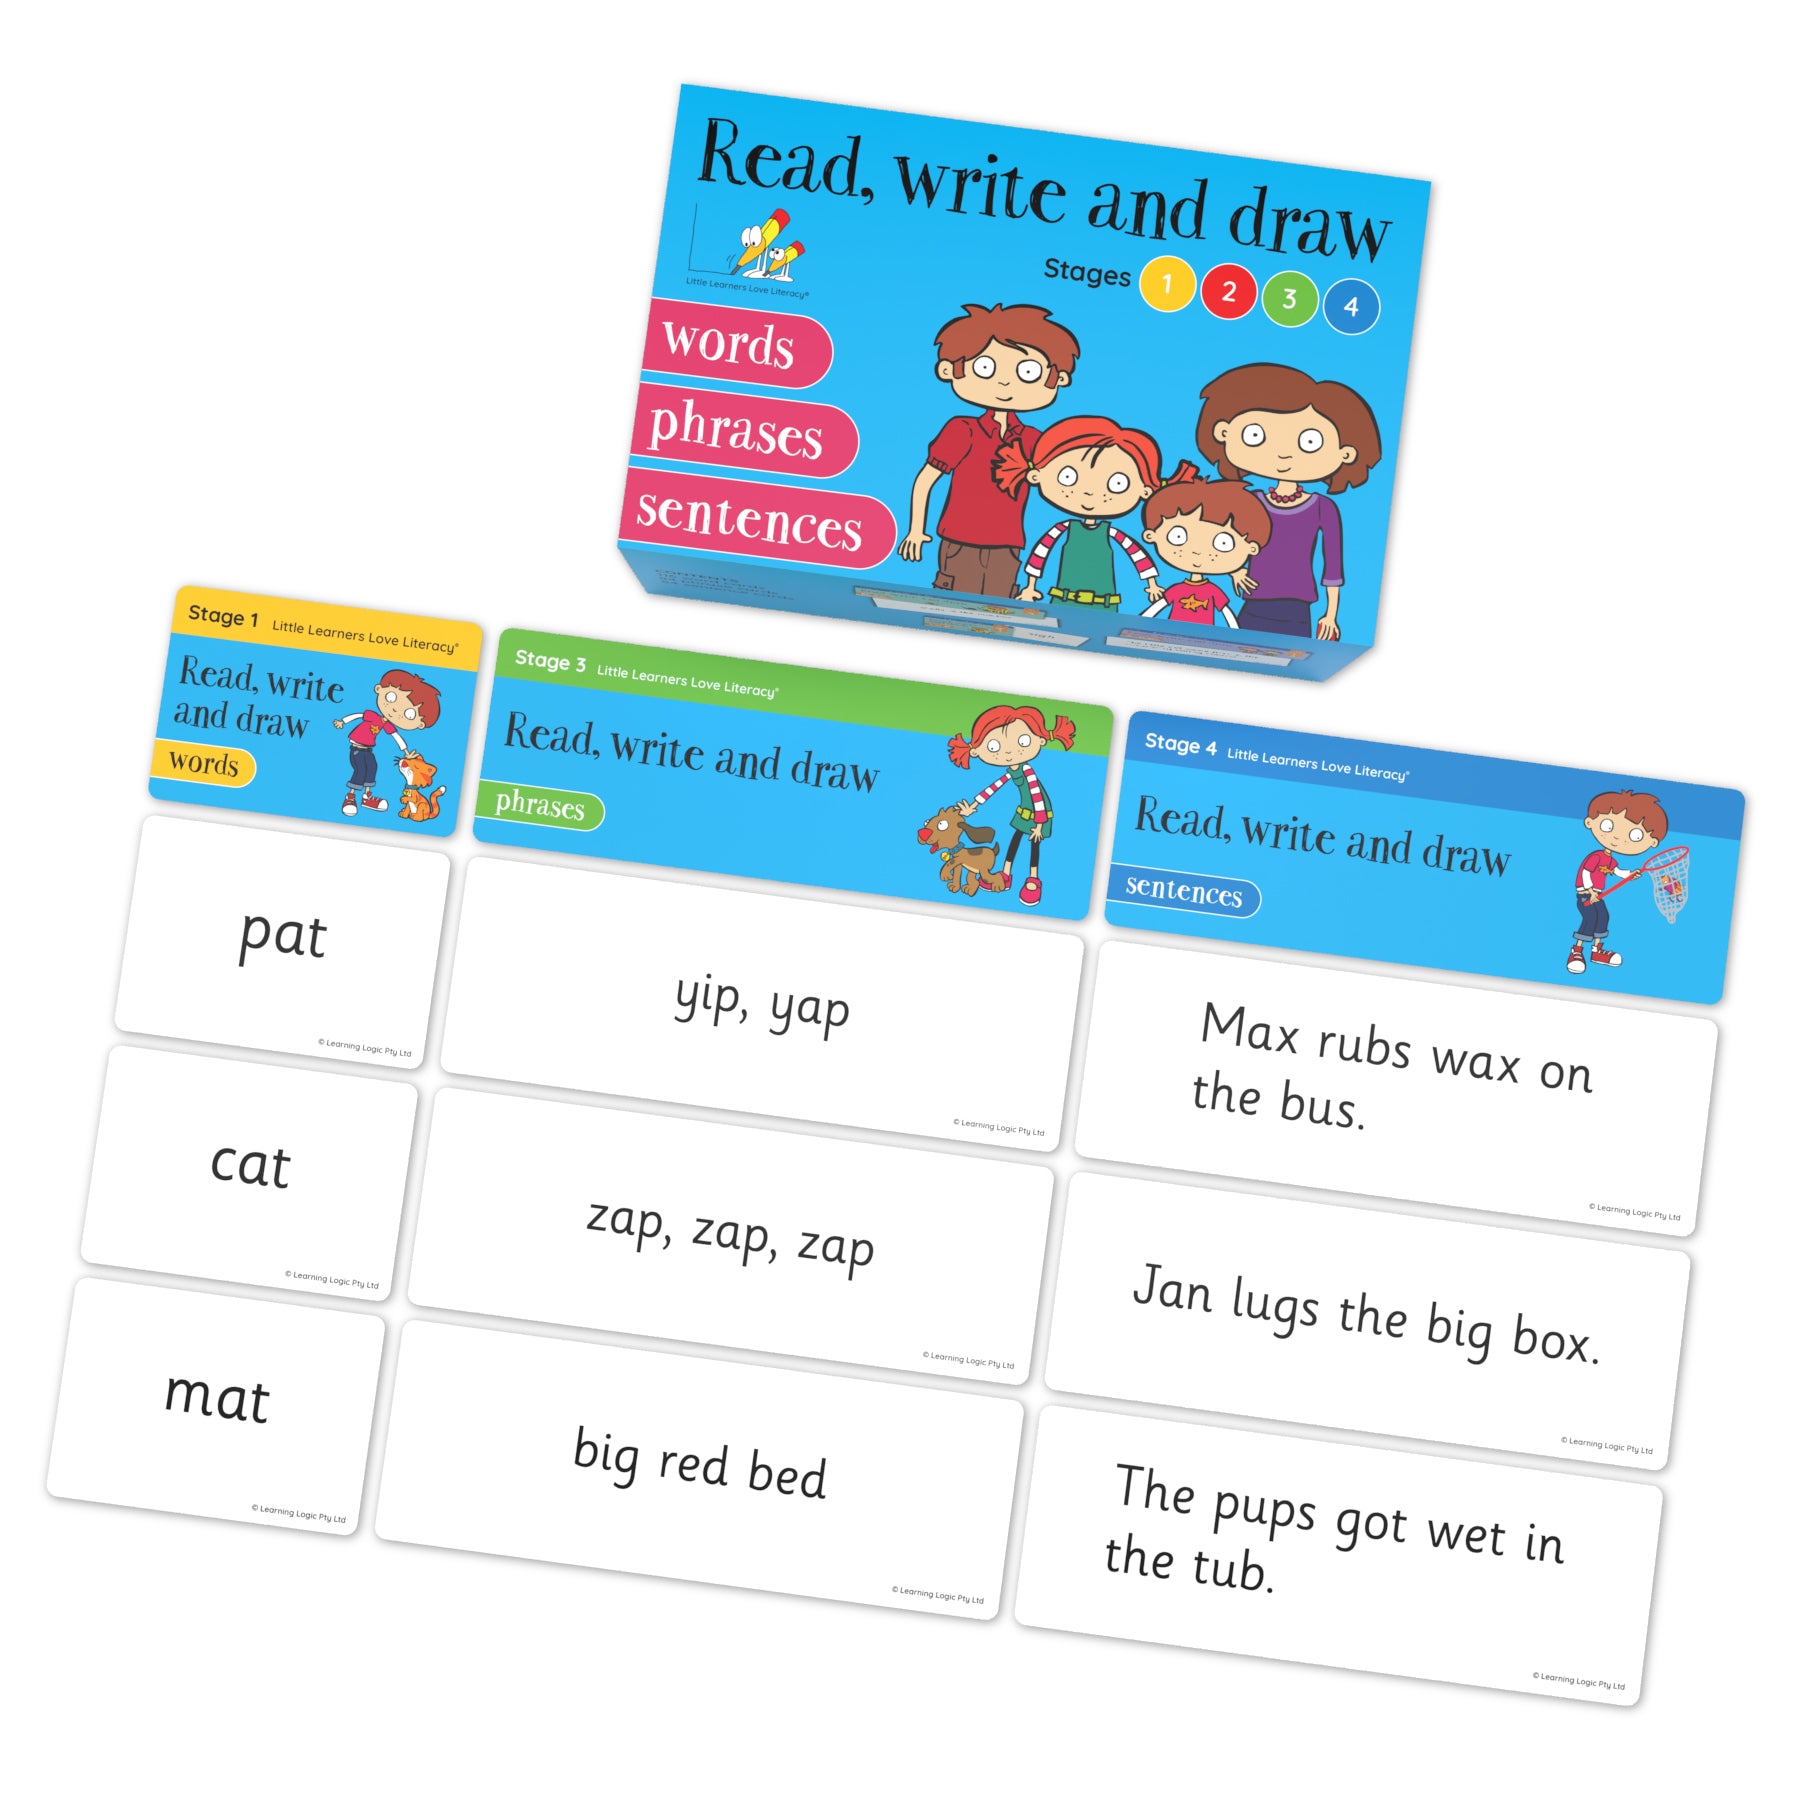 Read, Write and Draw Stages 1-4